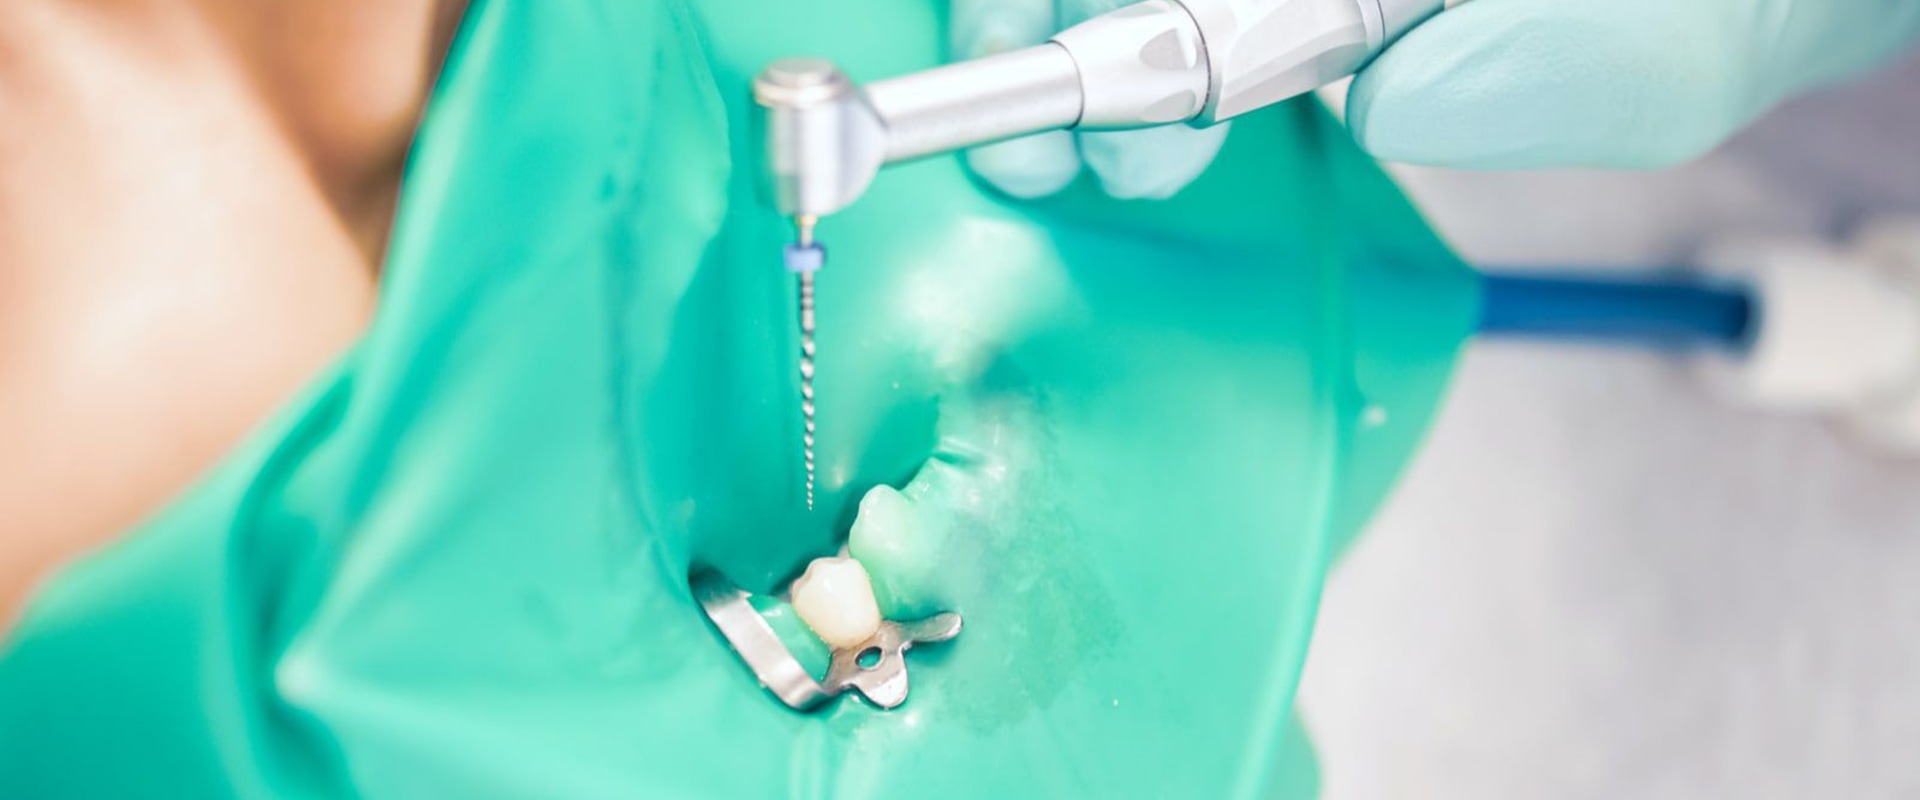 Why see an endodontist?